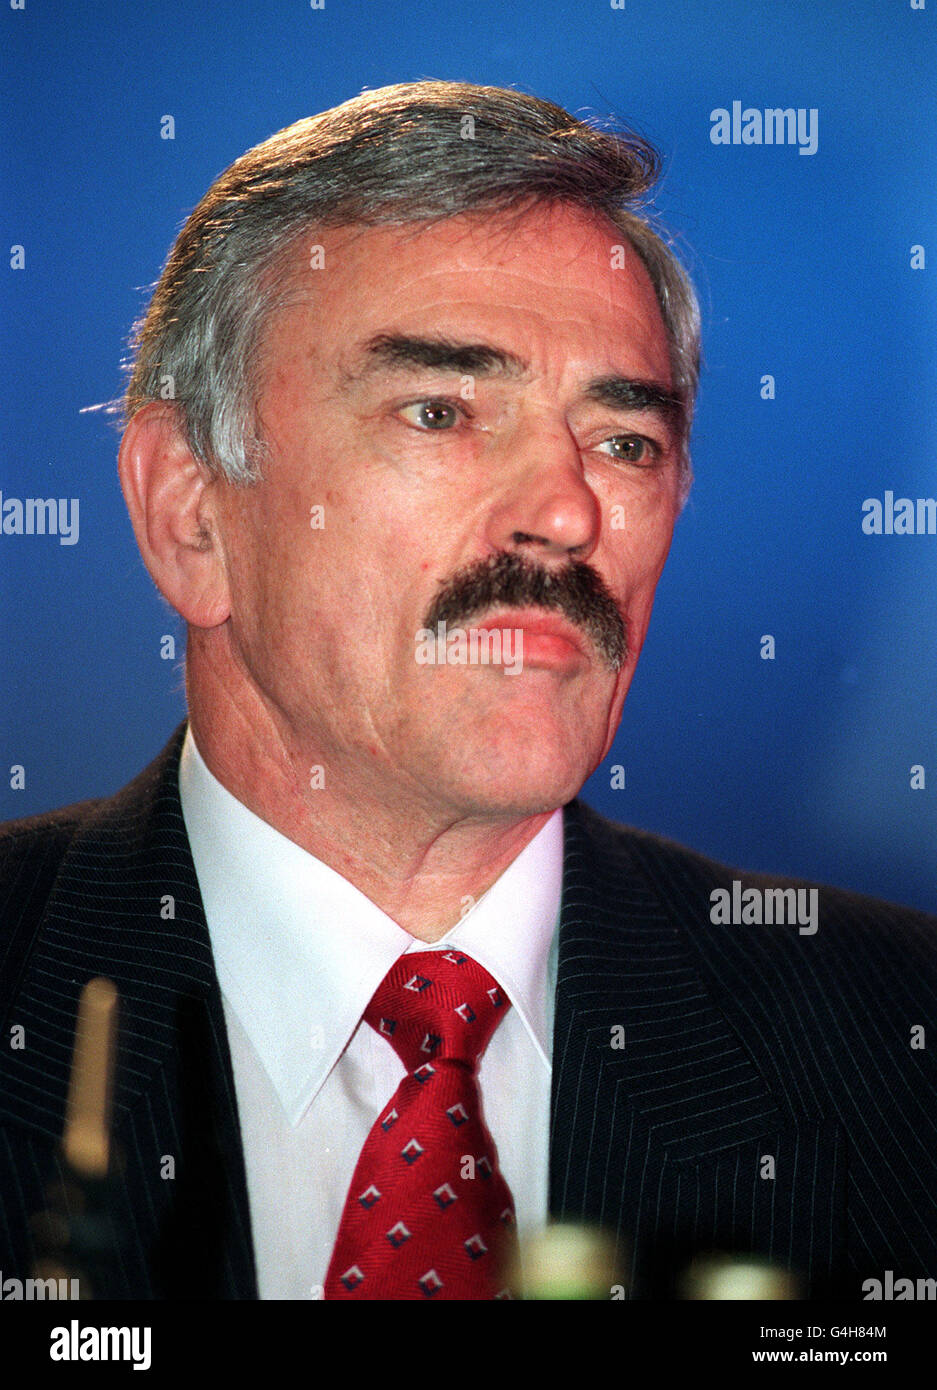 PA NEWS PHOTO 9/12/98  TOM MCKILLOP, OF THE ZENECA GROUP PLC ZENECA PHARMACEUTICALS, SPEAKING AT A NEWS CONFERENCE IN LONDON FOLLOWING THE MERGER OF ASTRA AND ZENECA, CREATING A GLOBAL LEADER IN PHARMACEUTICALS Stock Photo